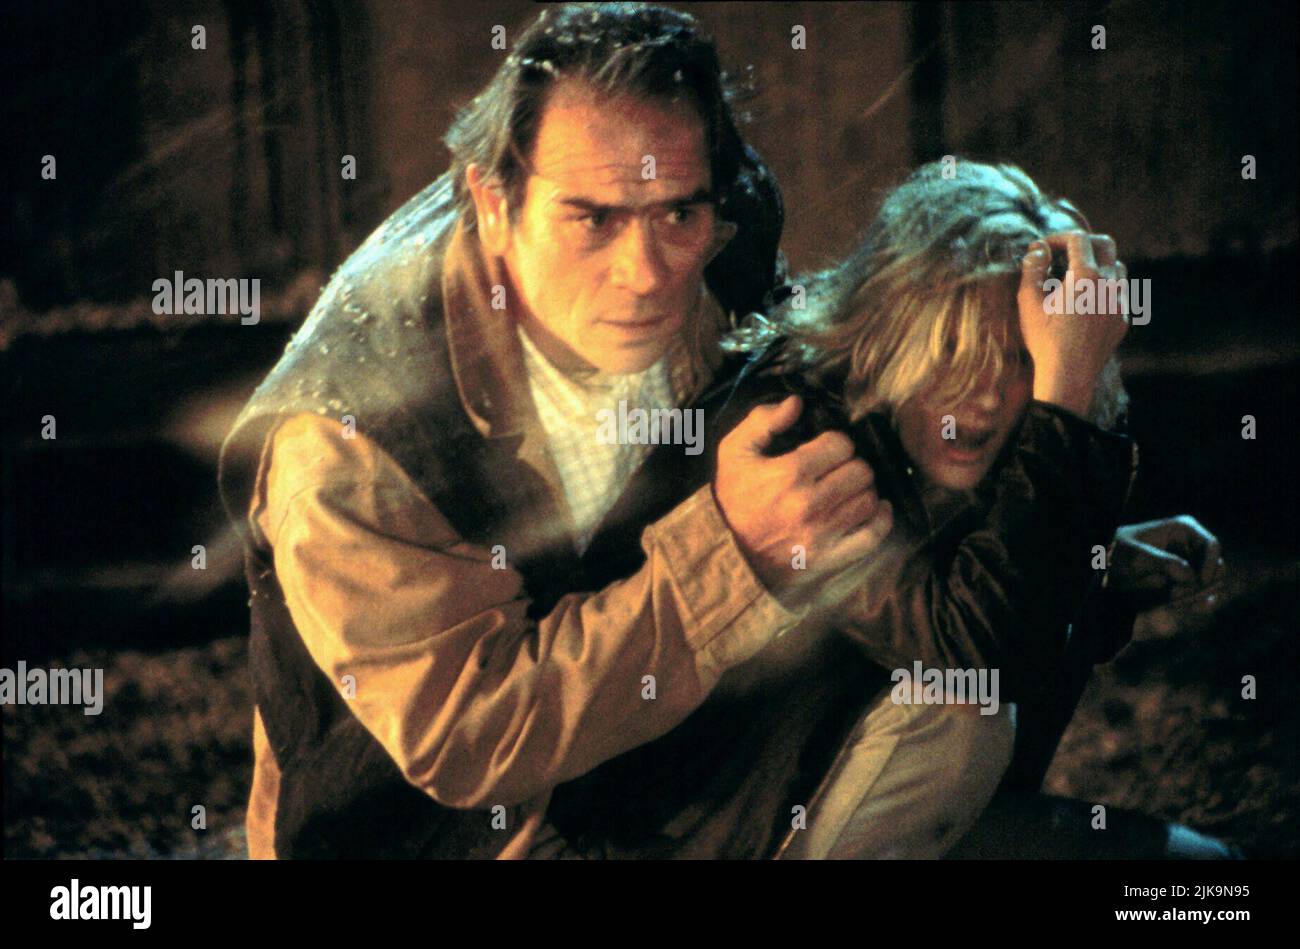 Tommy Lee Jones & Anne Heche Film: Volcano (USA 1997) Characters: Mike  Roark & Dr. Amy Barnes Director: Mick Jackson 25 April 1997 **WARNING**  This Photograph is for editorial use only and